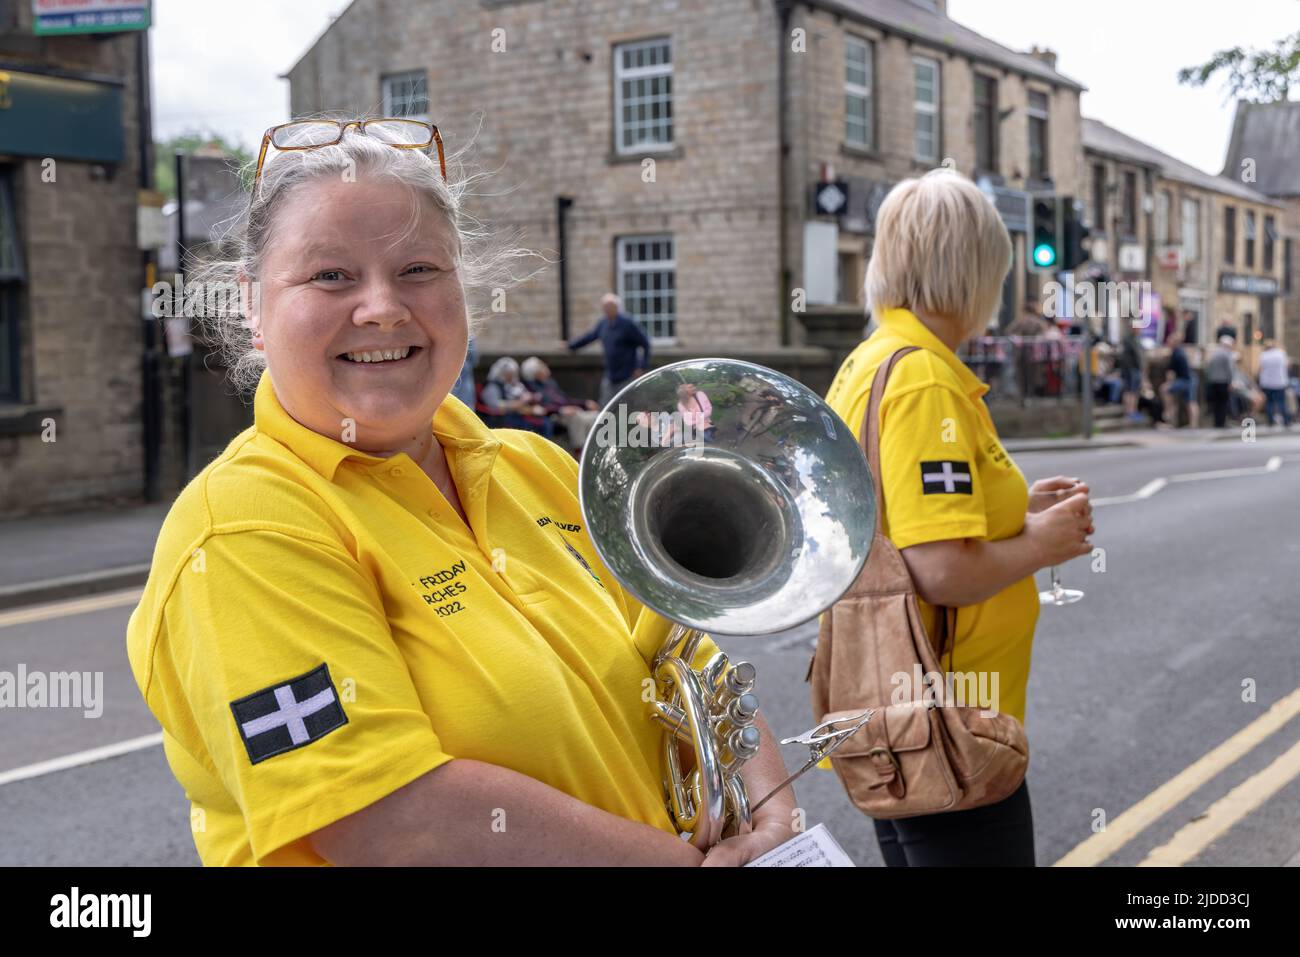 Happy smiling female musician participant on the street at the Uppermill Brass Band Whit Friday Contest in Saddleworth, England. Stock Photo